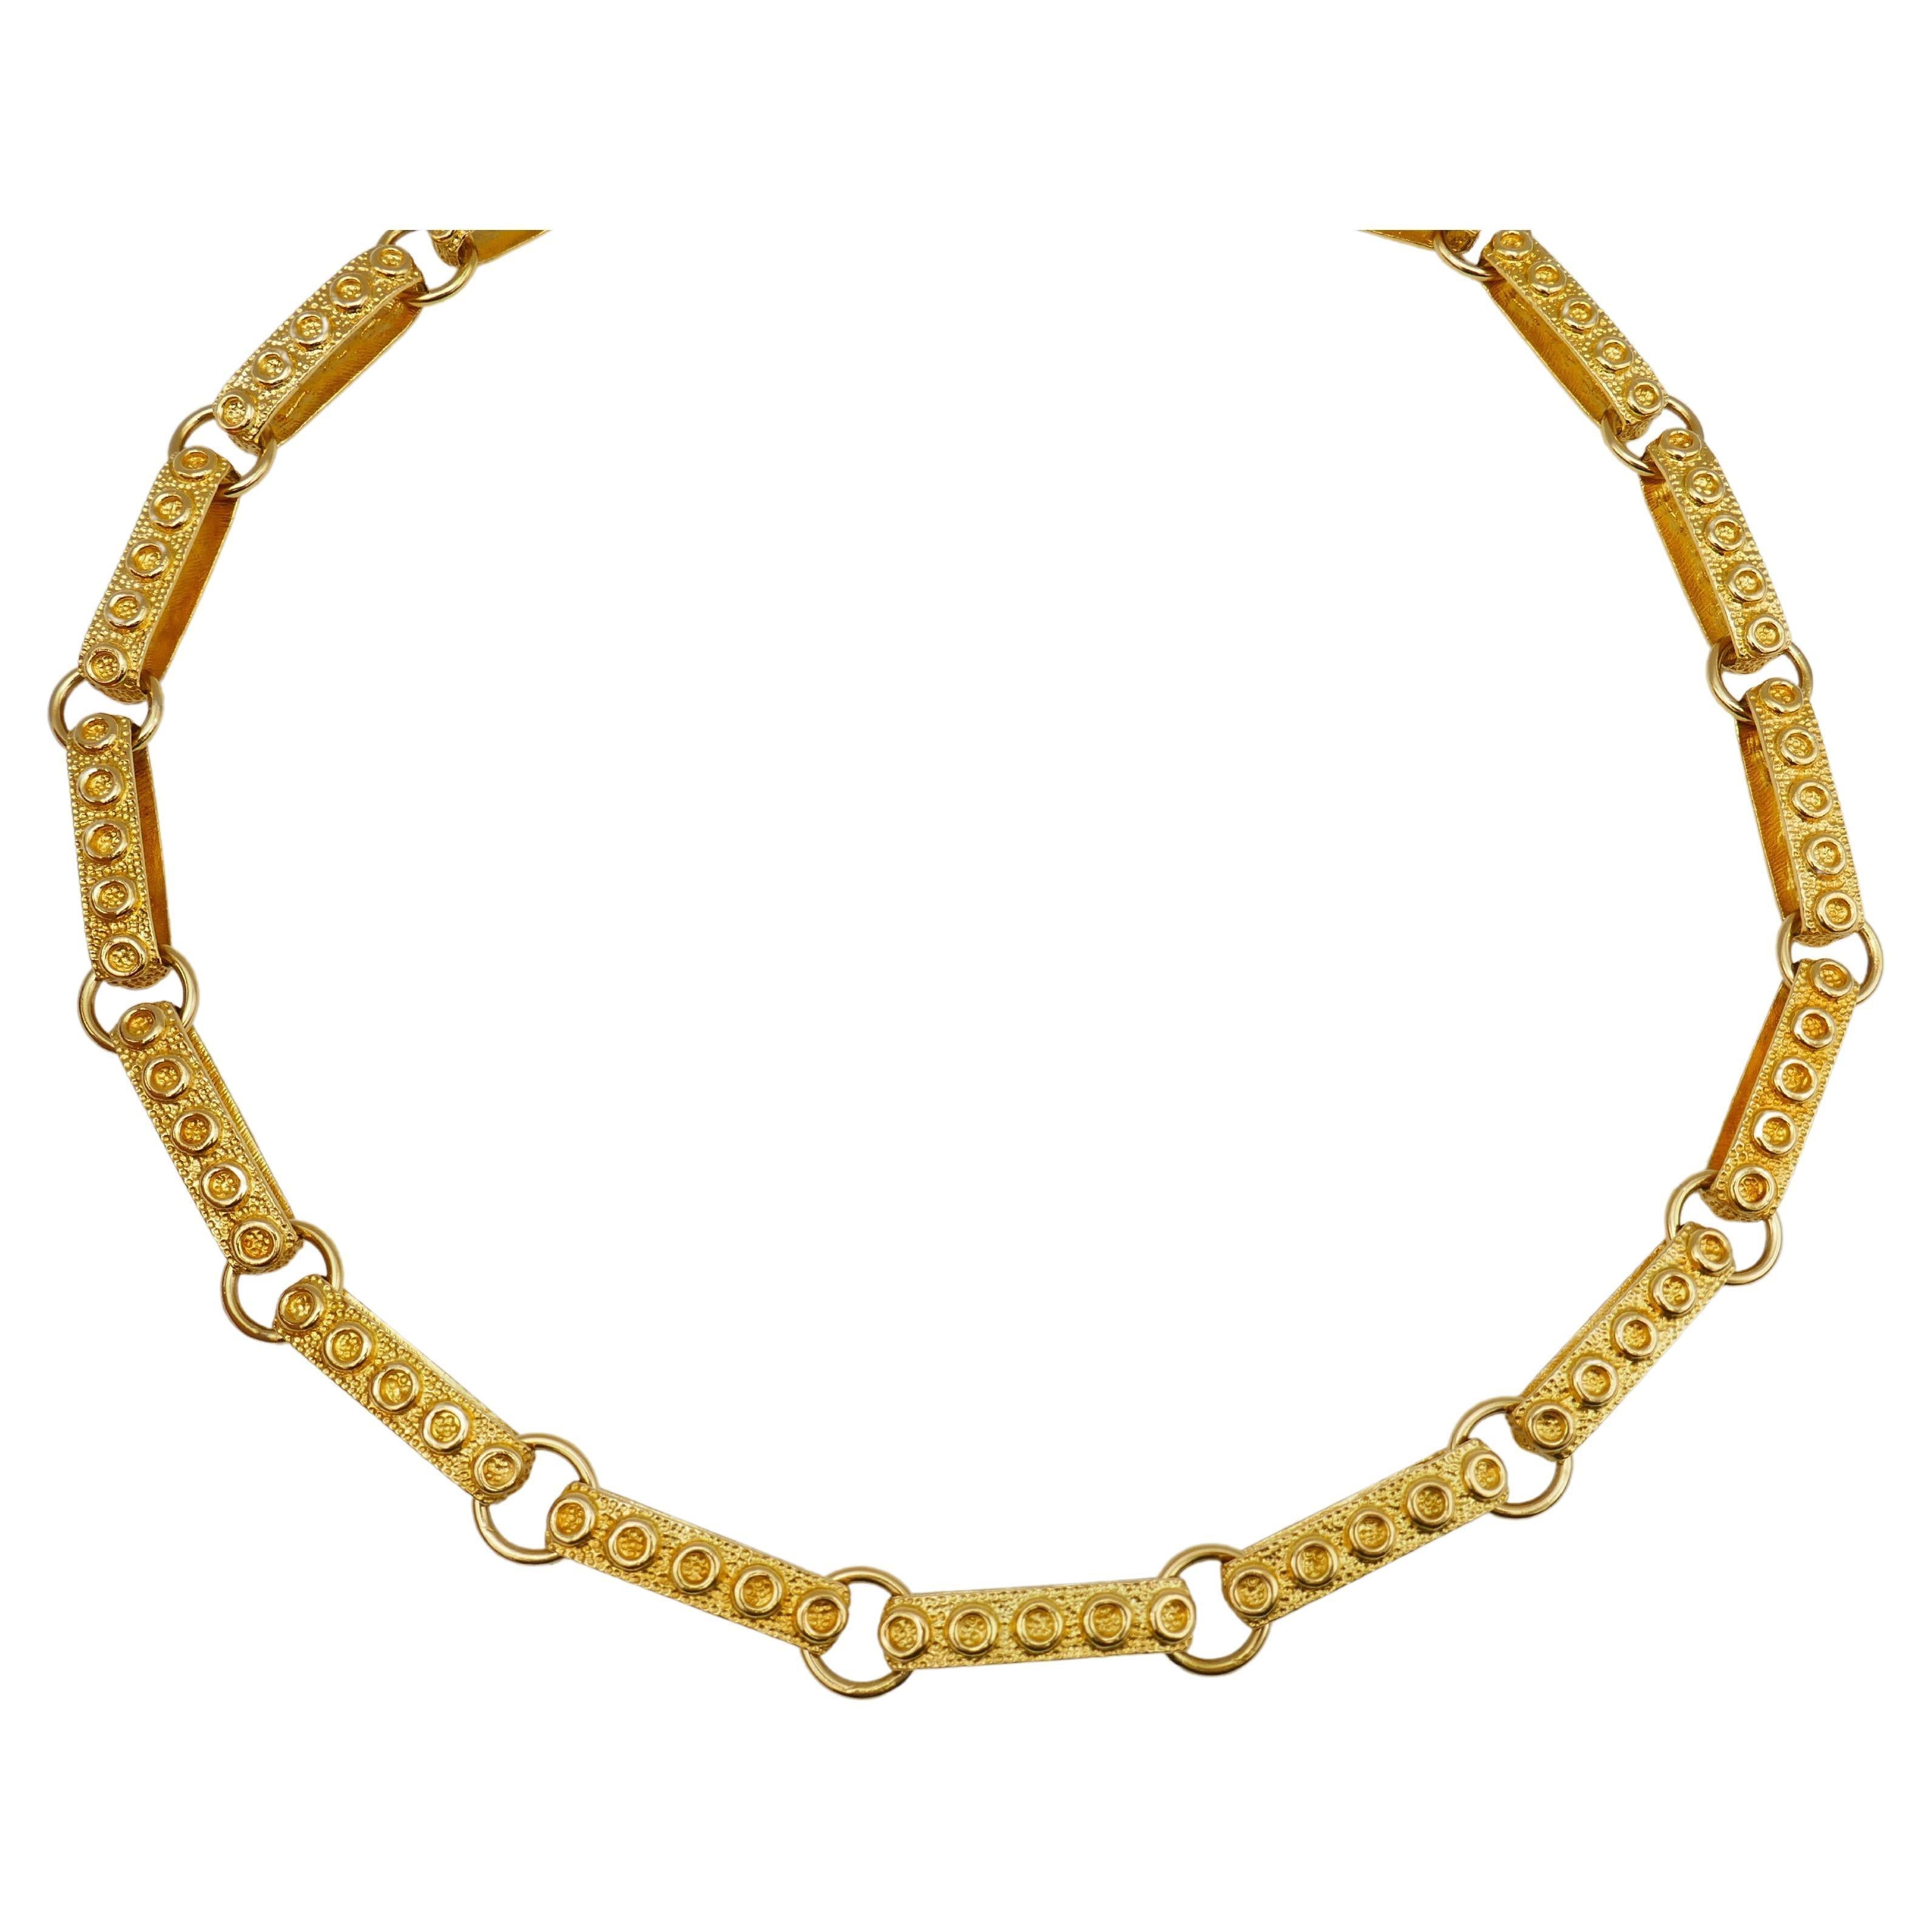 A great example of 1950s jewelry, this 14k gold necklace has all the attributes of the post-war era. It's a bold, cheerful and head-turning piece. The links comprise of long hammered gold loops. The length allows to wear this necklace doubled around